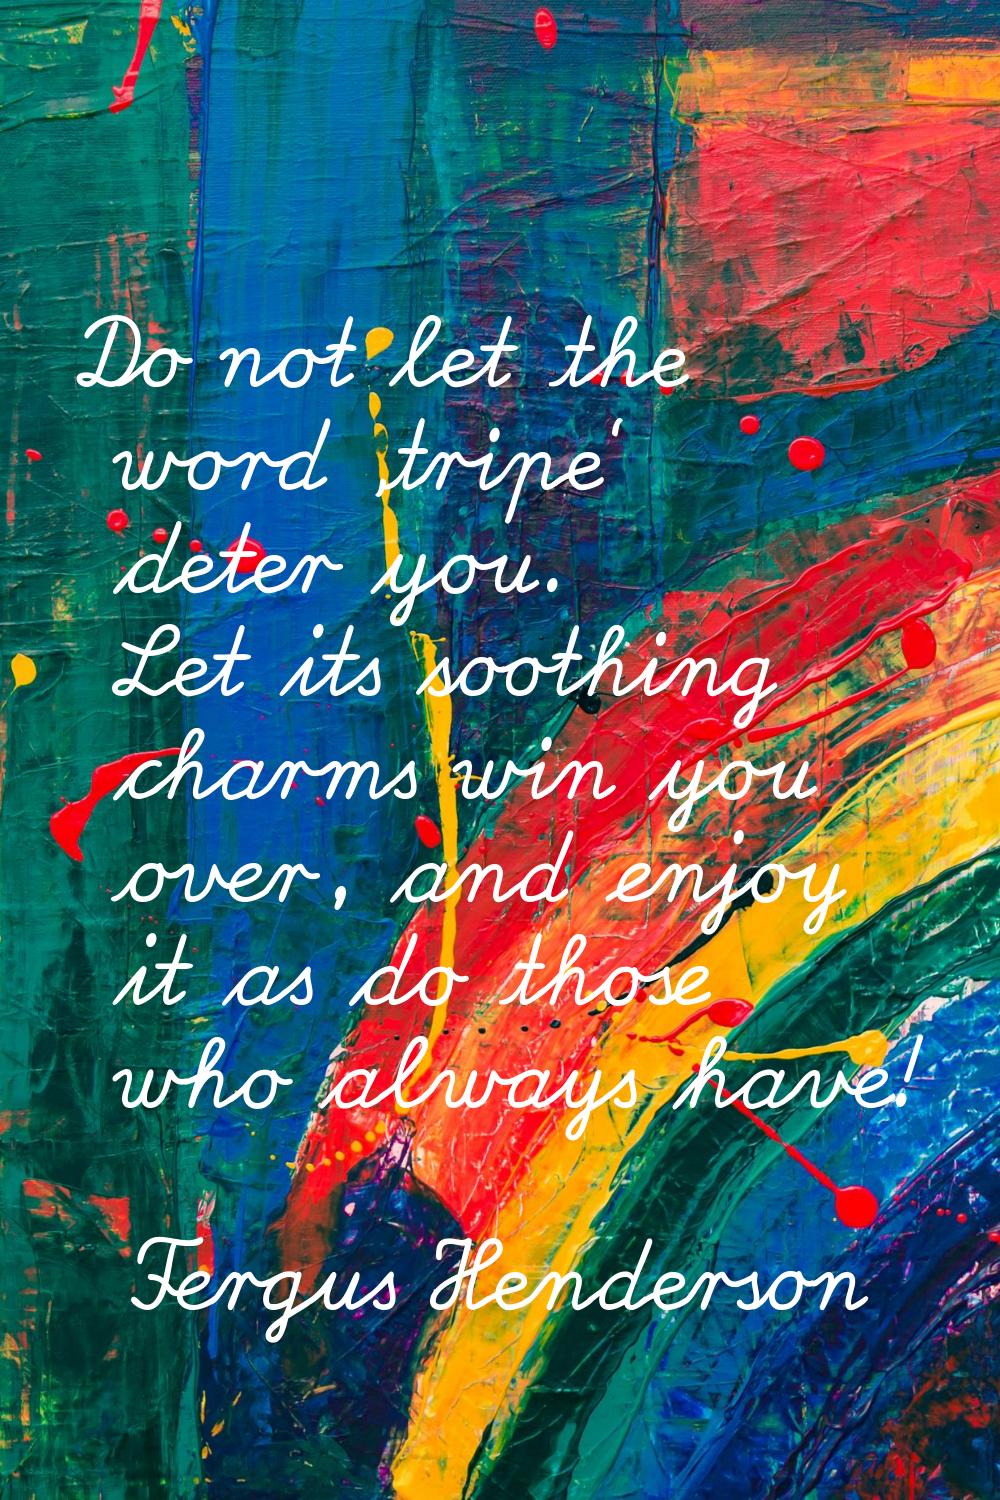 Do not let the word 'tripe' deter you. Let its soothing charms win you over, and enjoy it as do tho